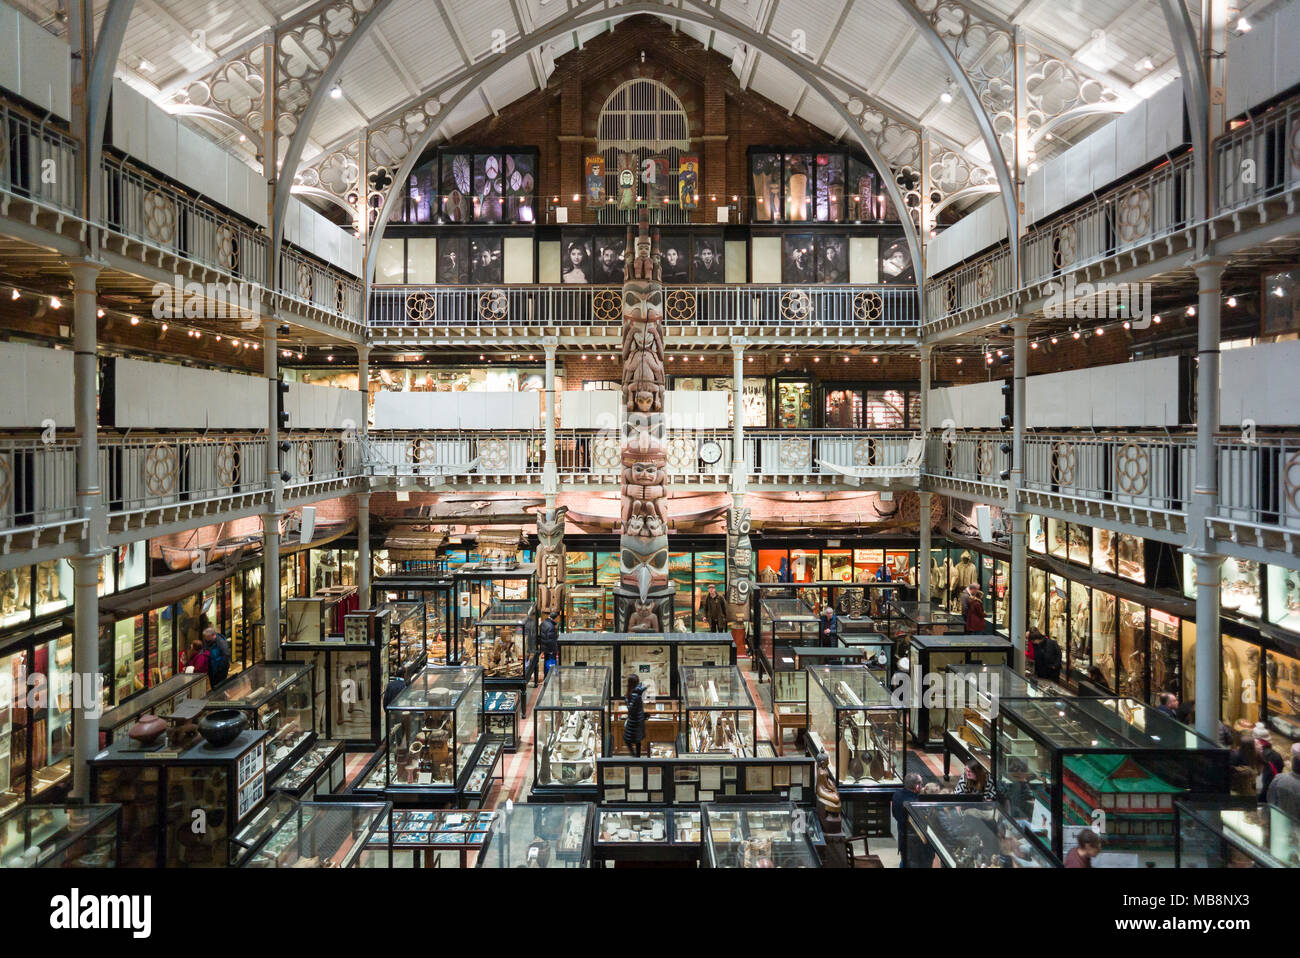 Oxford. England. Interior of the Pitt Rivers Museum, with archaeological and ethnographic objects from all over the world, founded in 1884. Stock Photo